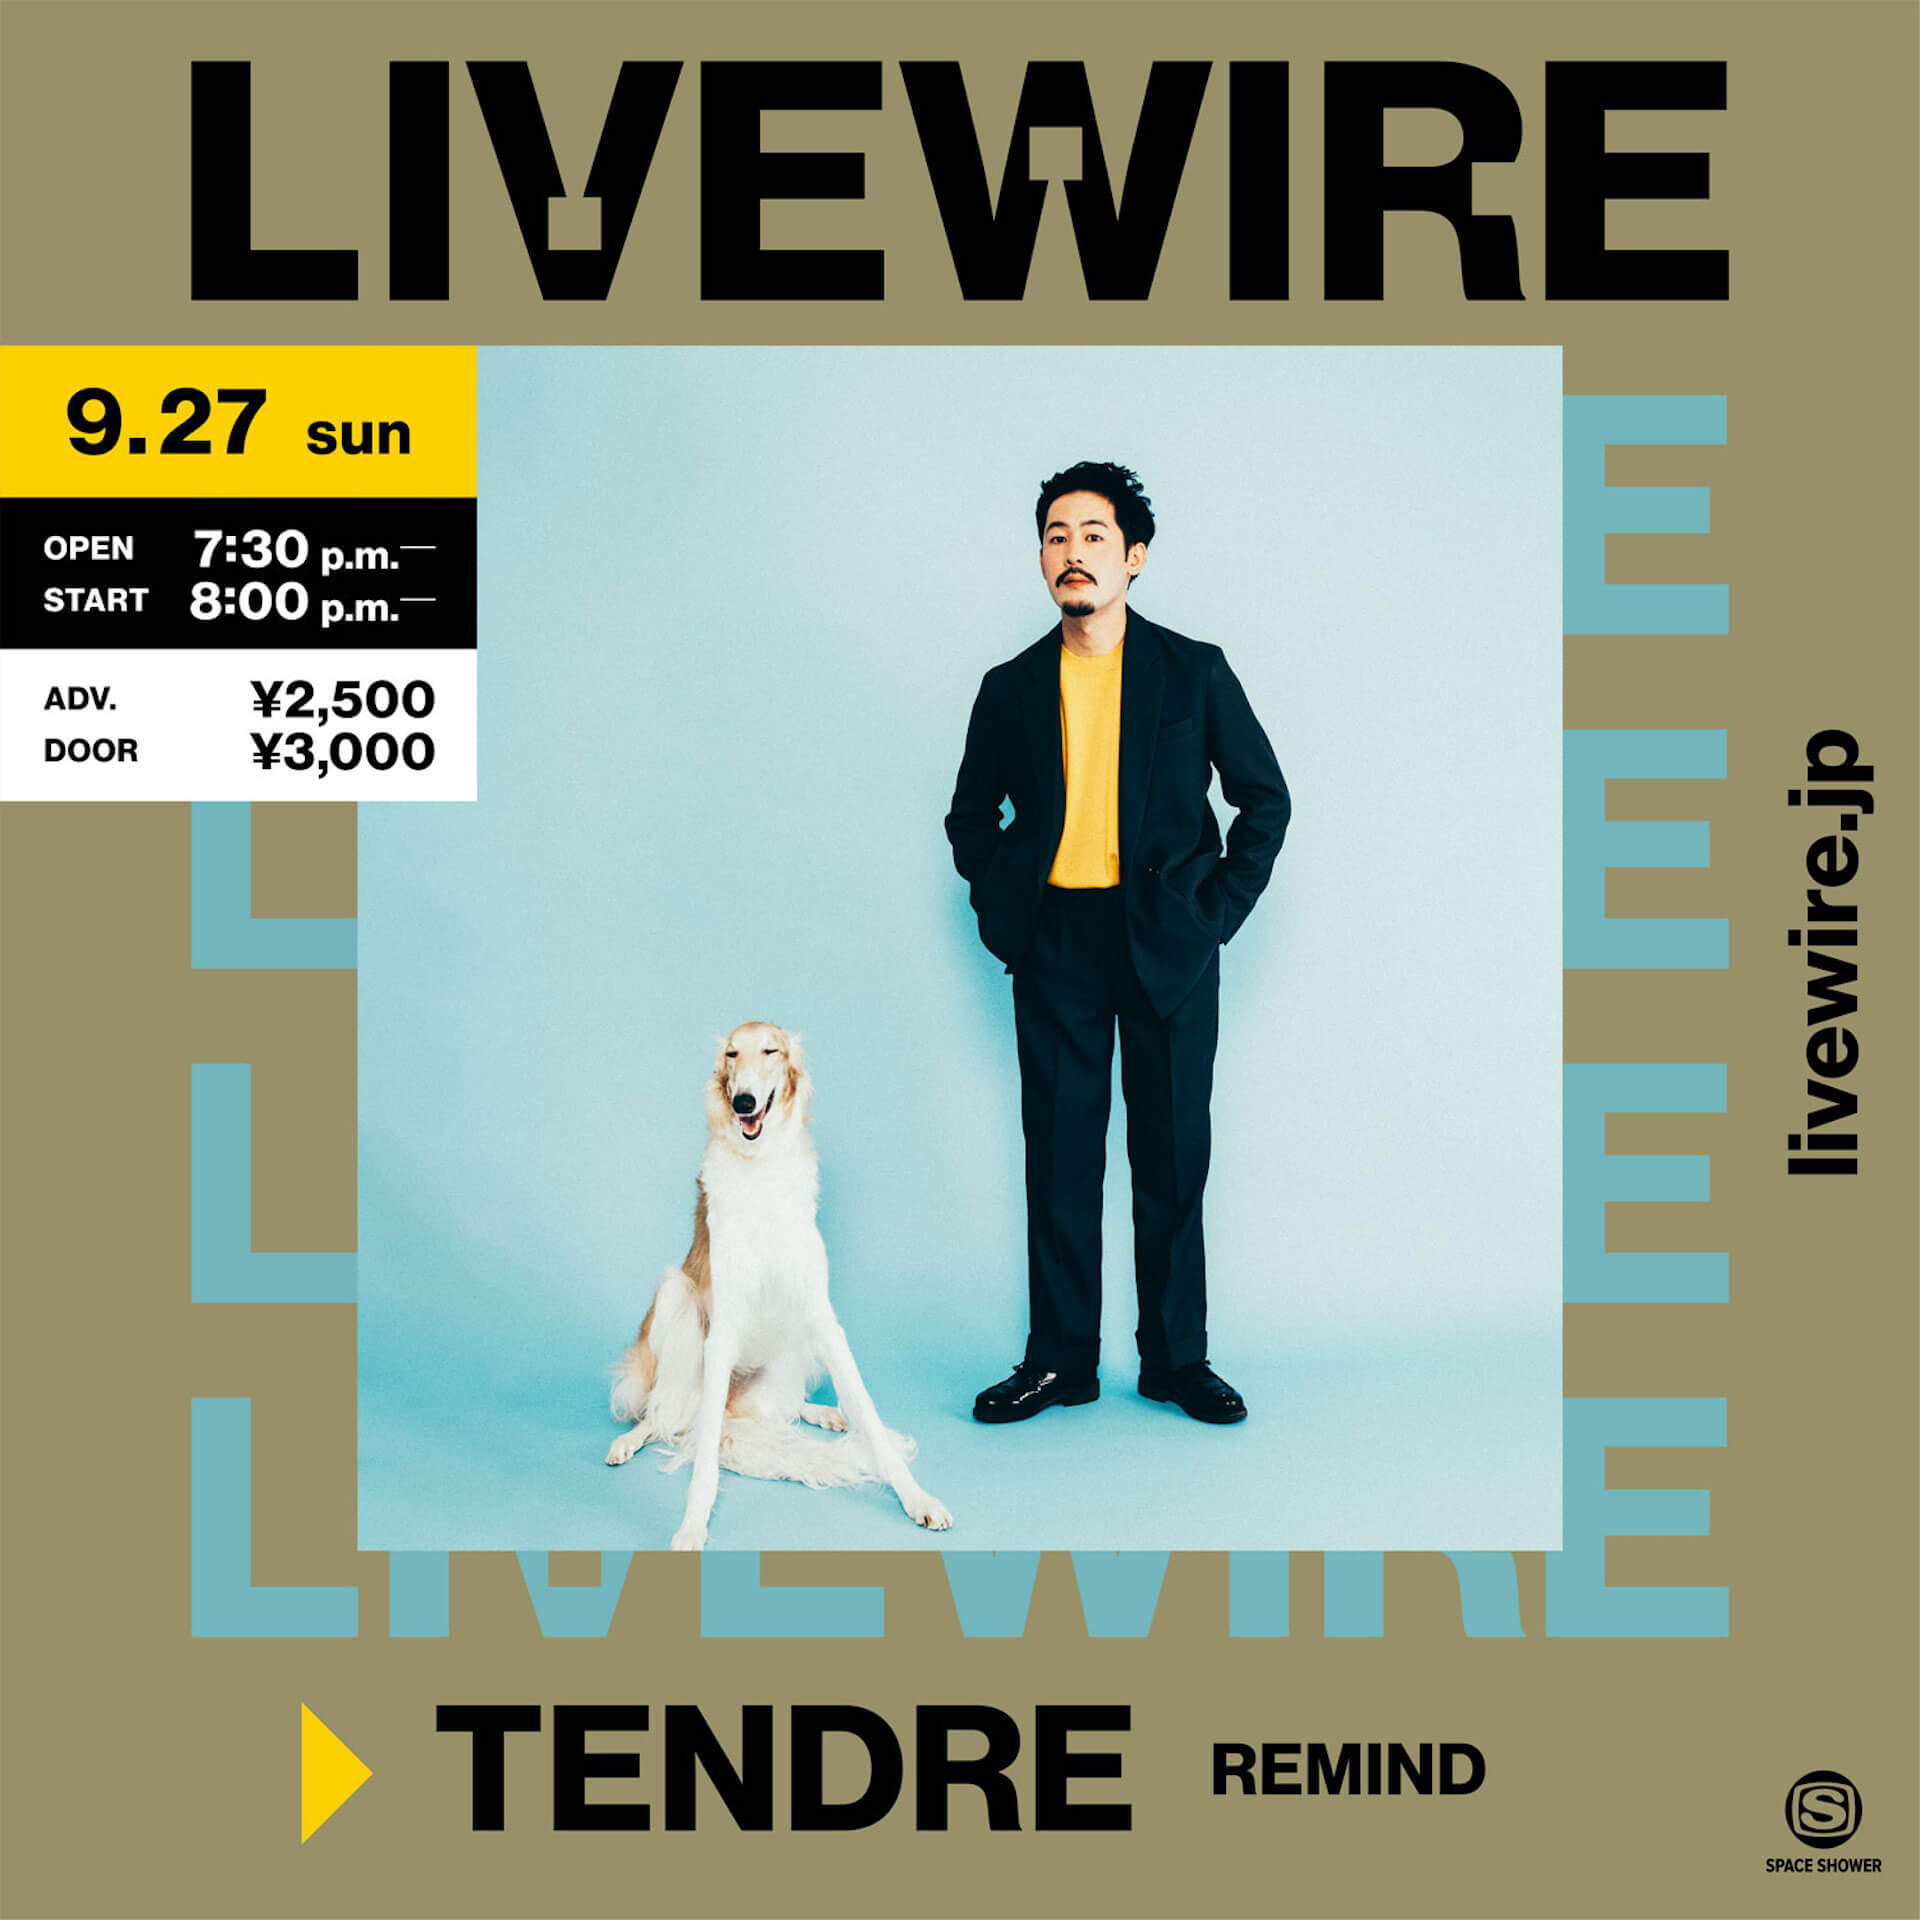 ＜LIVEWIRE＞で開催のTENDRE初有料配信ライブ・REMINDの詳細が決定＆チケット発売！当日はマル秘ゲストも登場 music2020908-livewire